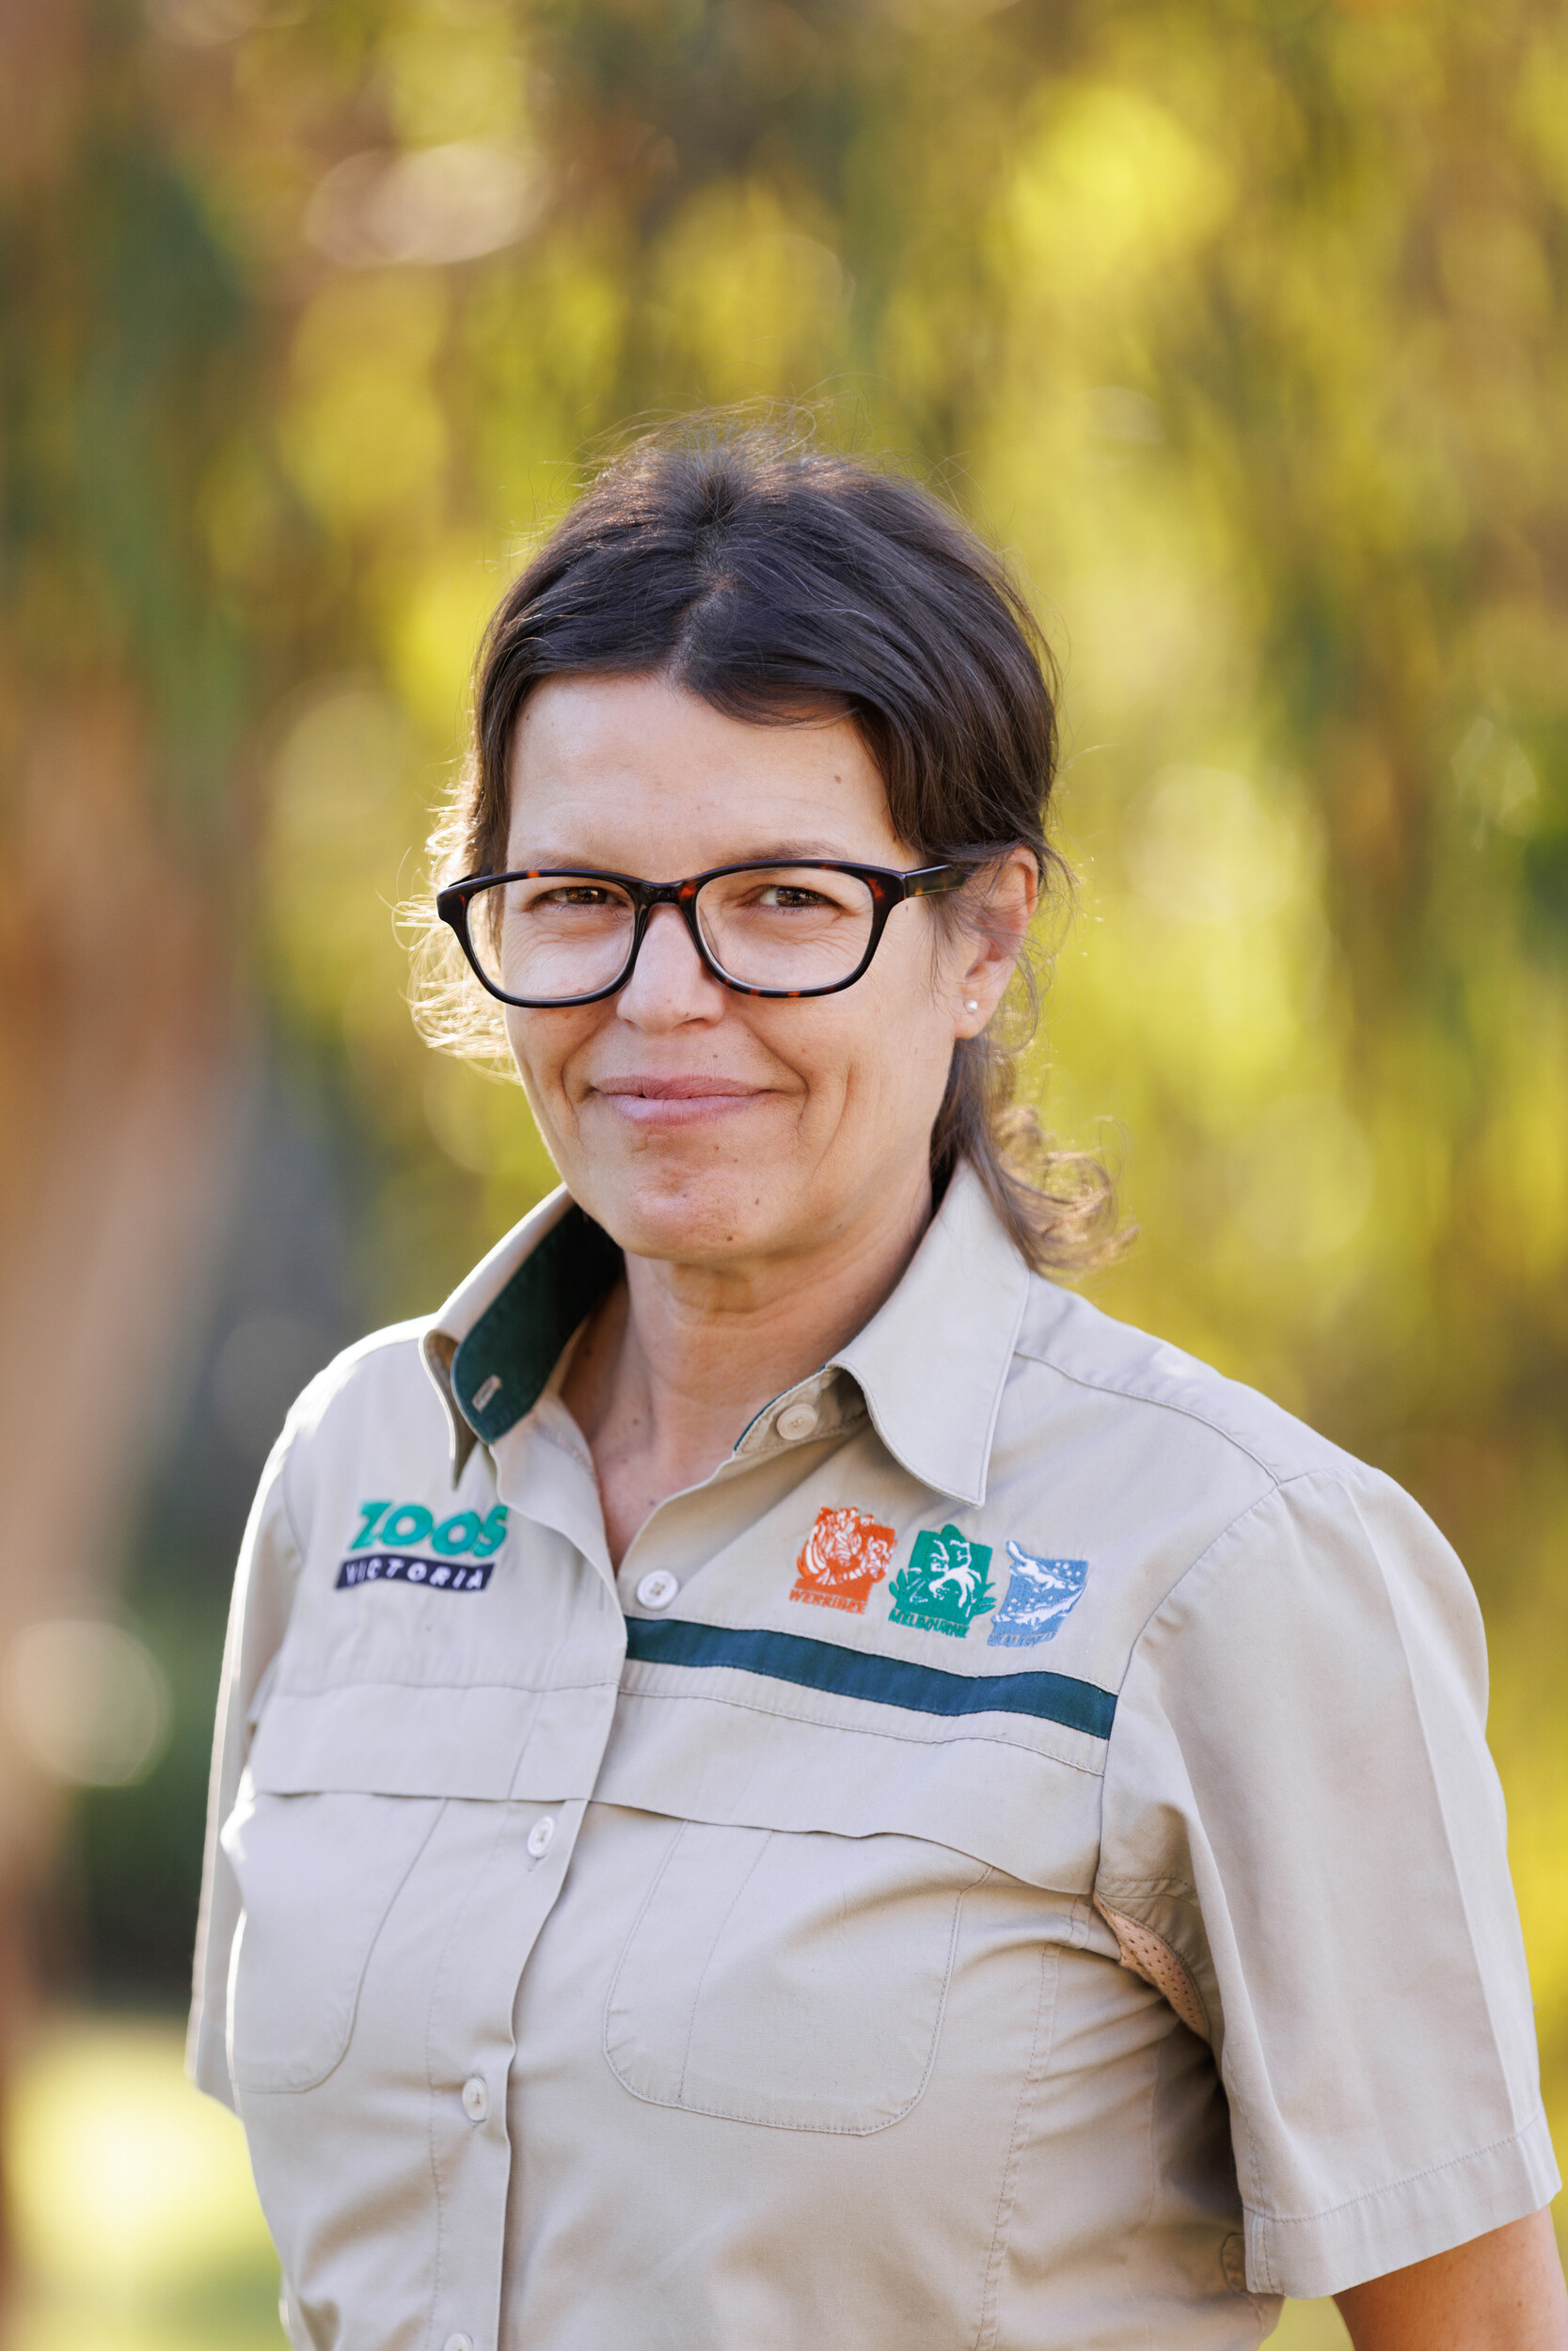 Smiling woman wearing glasses and a zoo keeper uniform